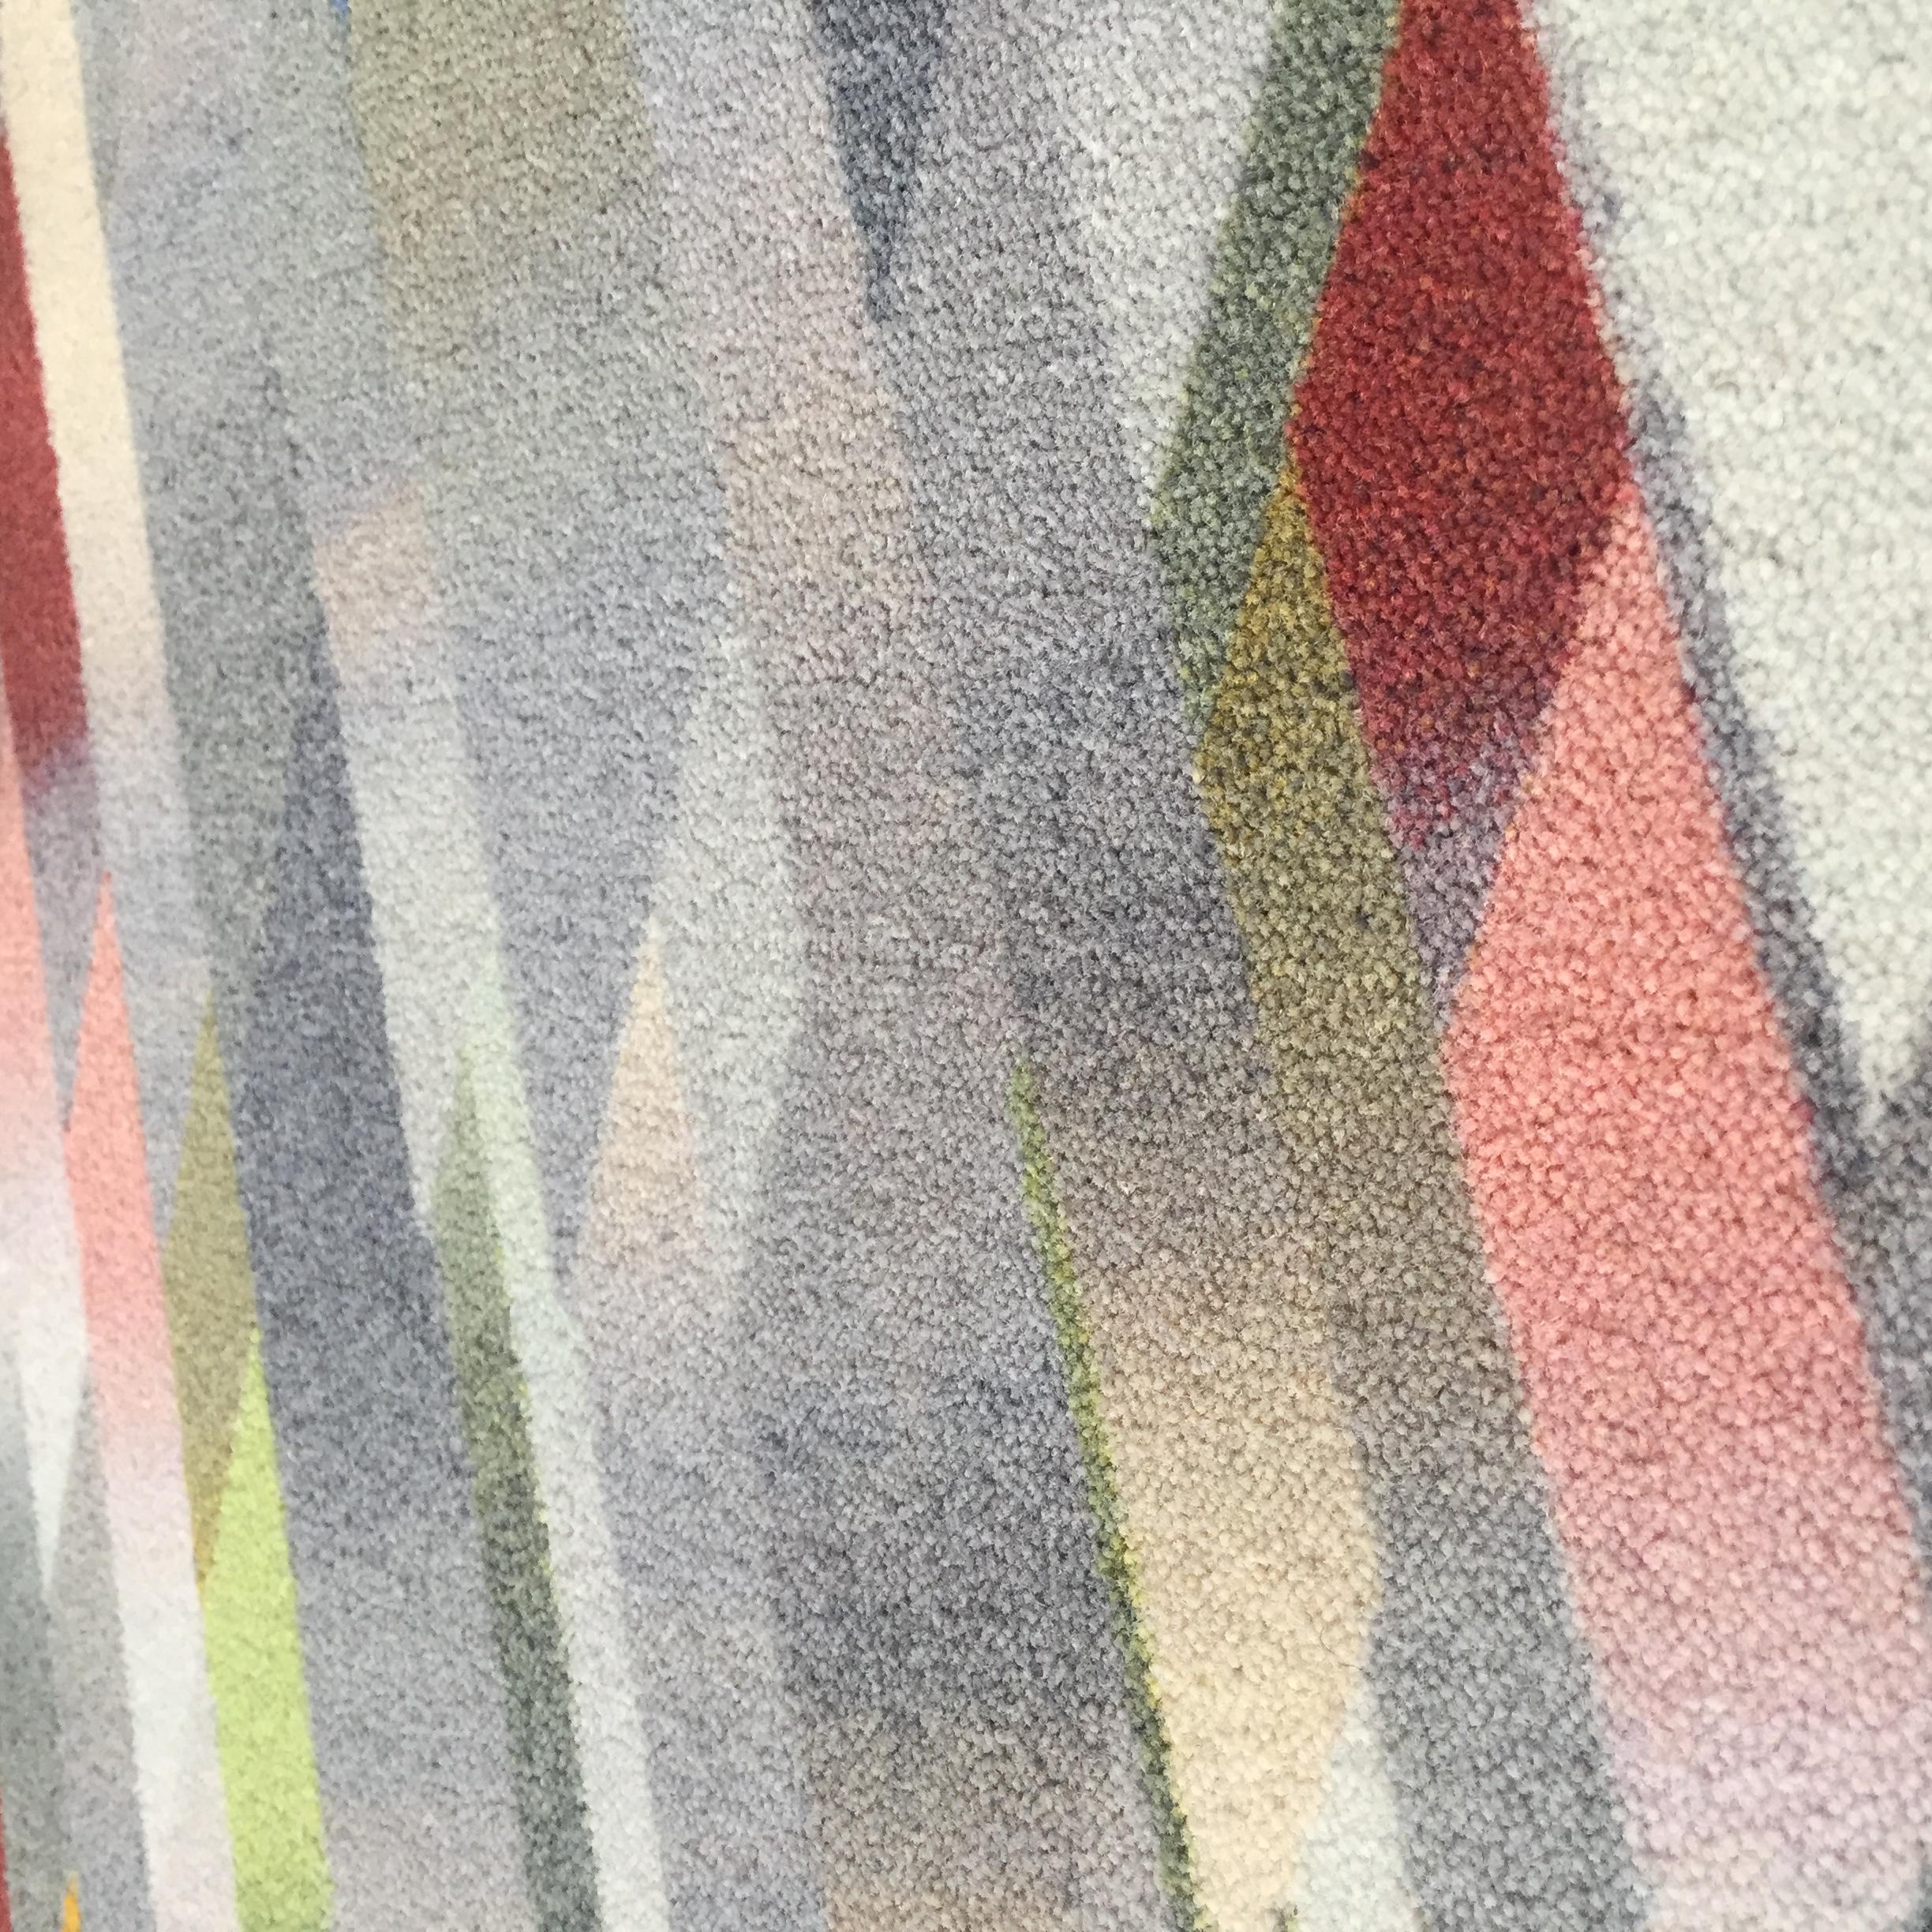 Moooi Large Diagonal Gradient Pastel rug in Wool by Kit Miles

Kit Miles is the eponymous luxury interior surface design studio founded in 2011 by British textile designer, Kit Miles. Renowned for dynamic use of colour and lavishly drawn imagery,